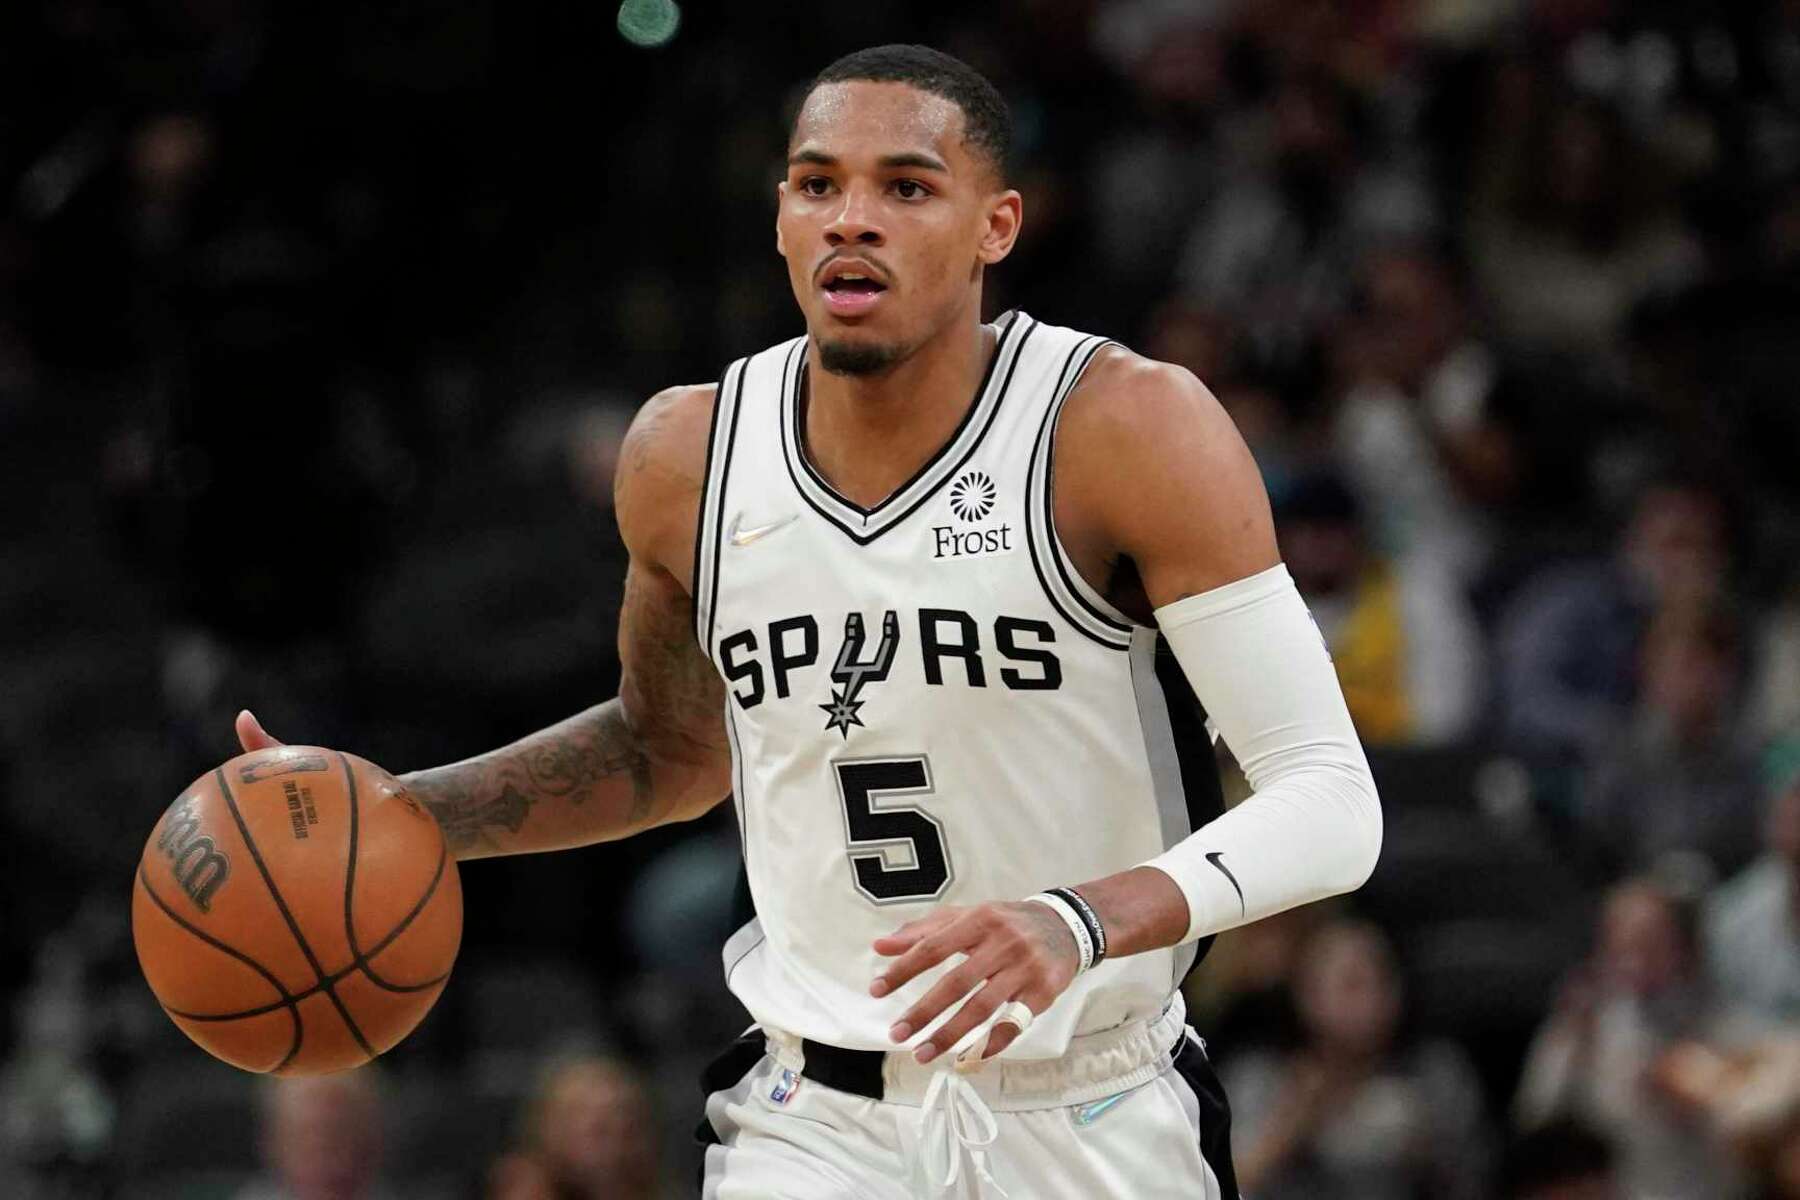 DEJOUNTE MURRAY SELECTED TO 2022 NBA ALL-STAR GAME